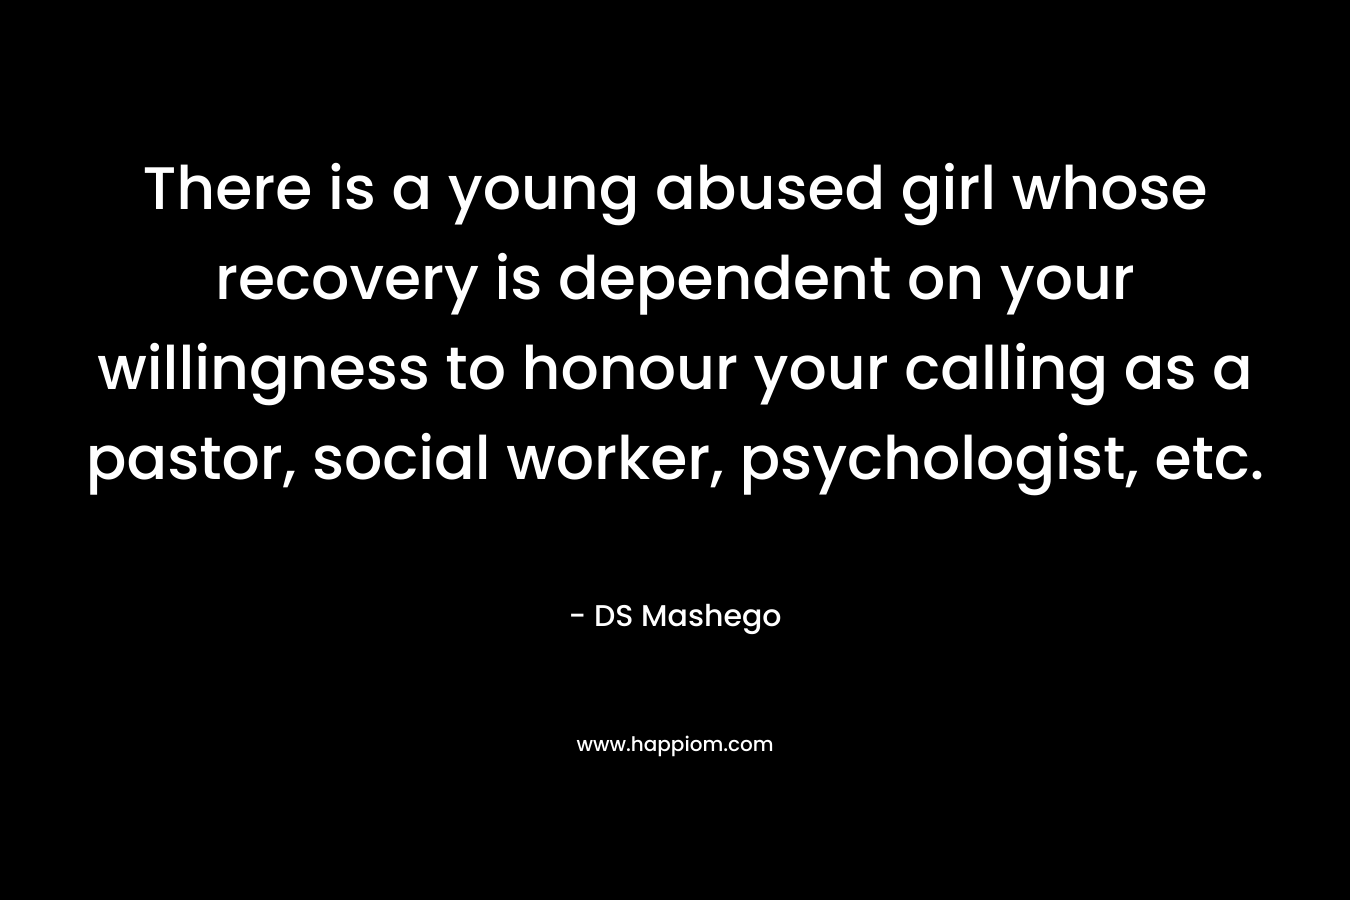 There is a young abused girl whose recovery is dependent on your willingness to honour your calling as a pastor, social worker, psychologist, etc.